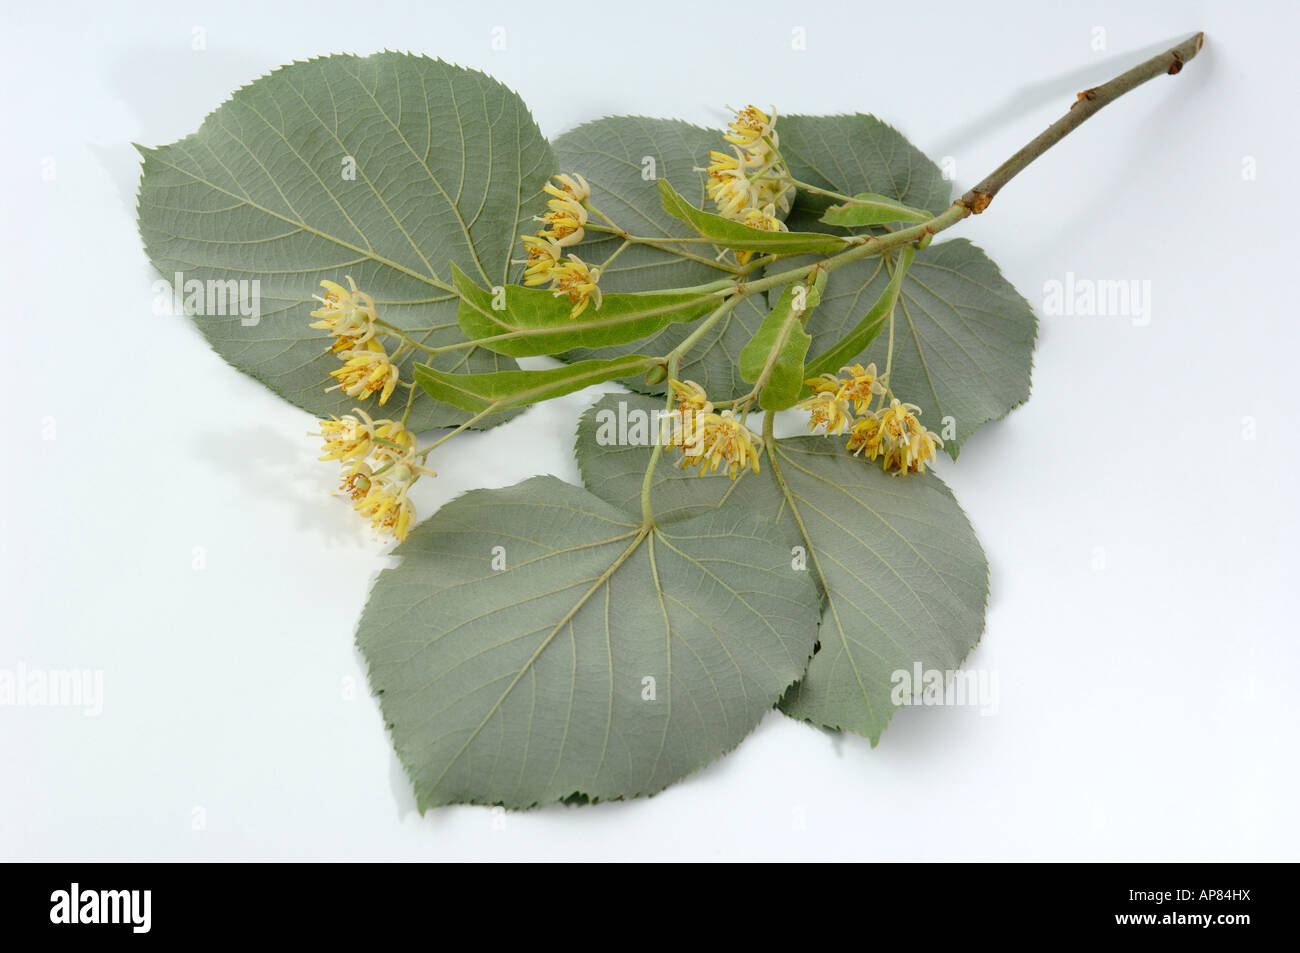 Silver Lime (Tilia tomentosa Tilia argentea) twig with leaves and blossoms studio picture Stock Photo